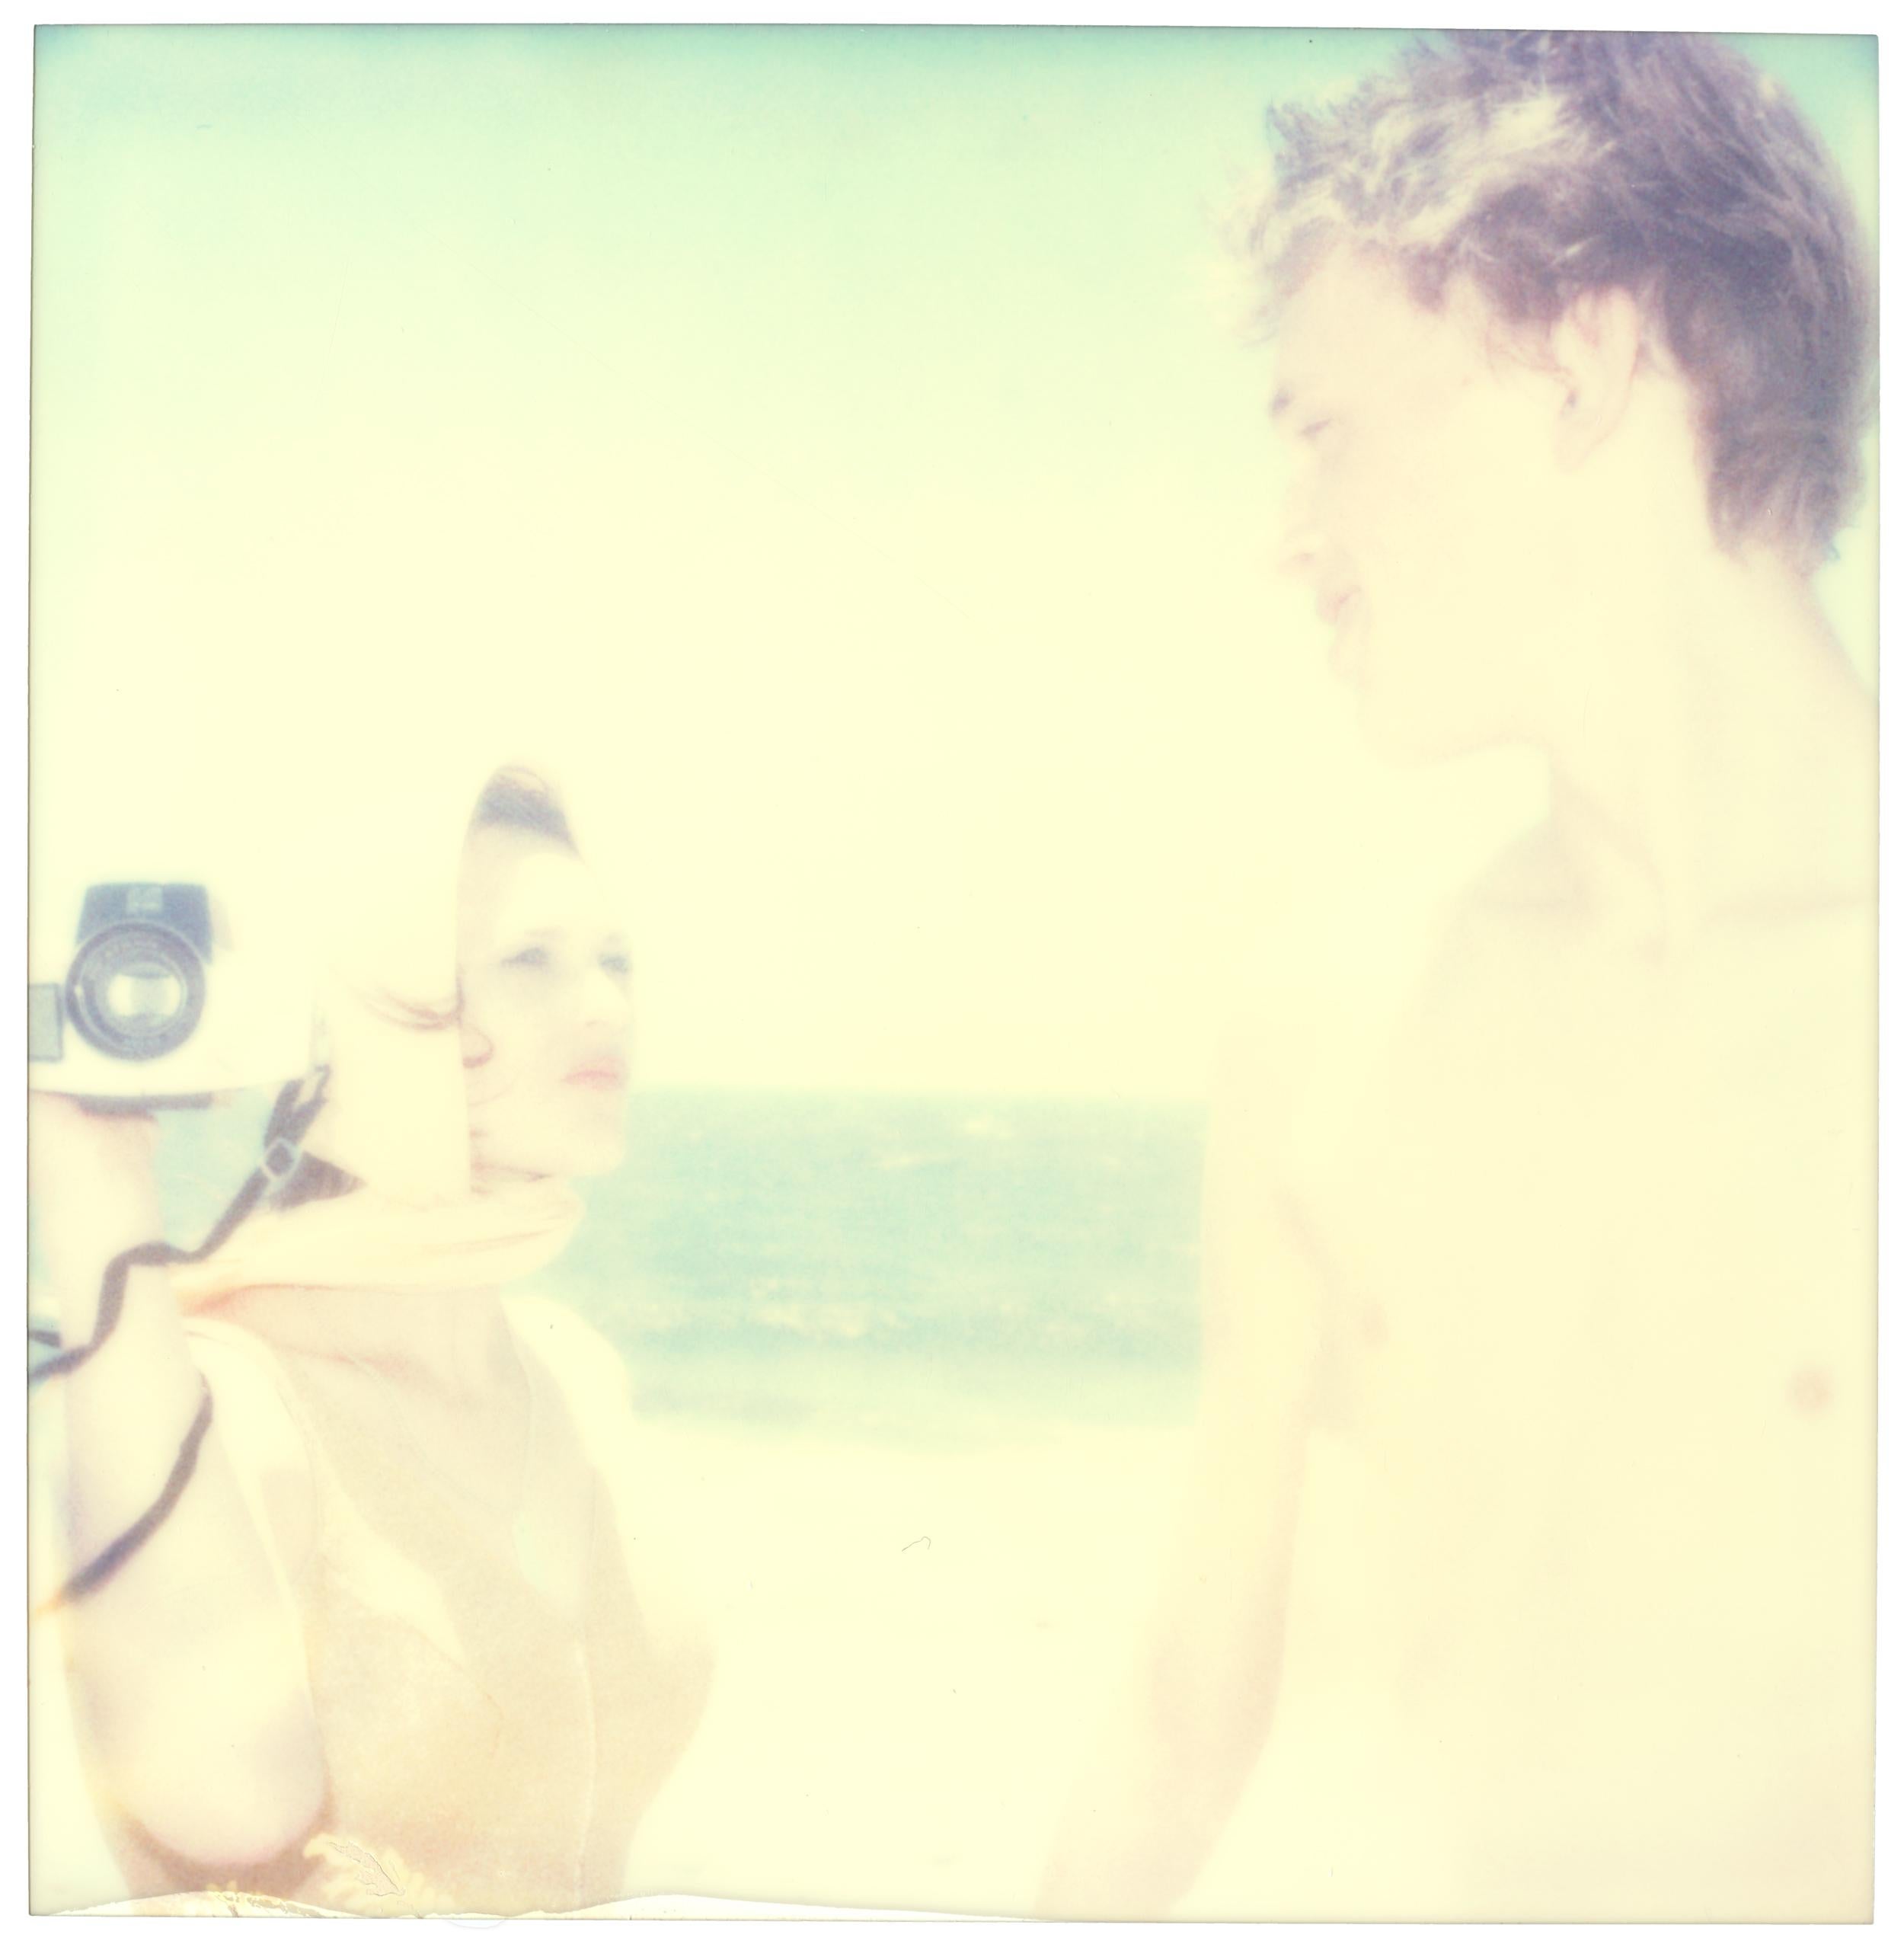 The Diva and the Boy (Beachshoot) - 2005

Edition of 10 plus 2 artist Proofs. 
38x37cm each, installed 129x126cm. 
9 archival C-Prints, based on 9 Polaroids. 
Certificate and Signature label, 
artist Inventory # 1461. 
Not